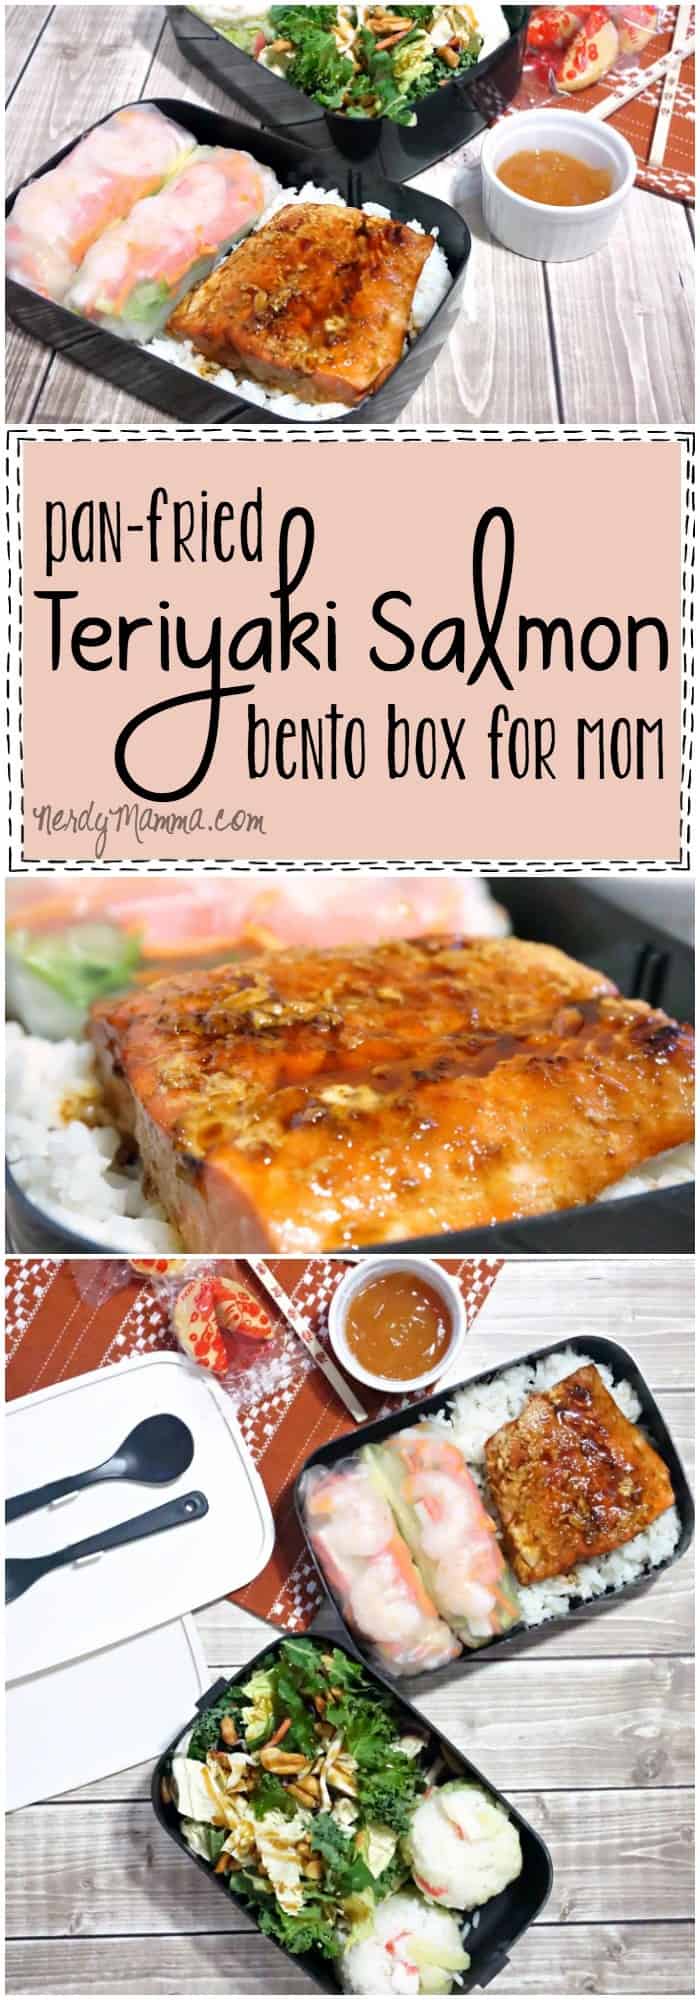 This recipe for Pan-Fried Teriyaki Salmon is so easy. And it's perfect for a grown-up bento box lunch for mom! LOL!